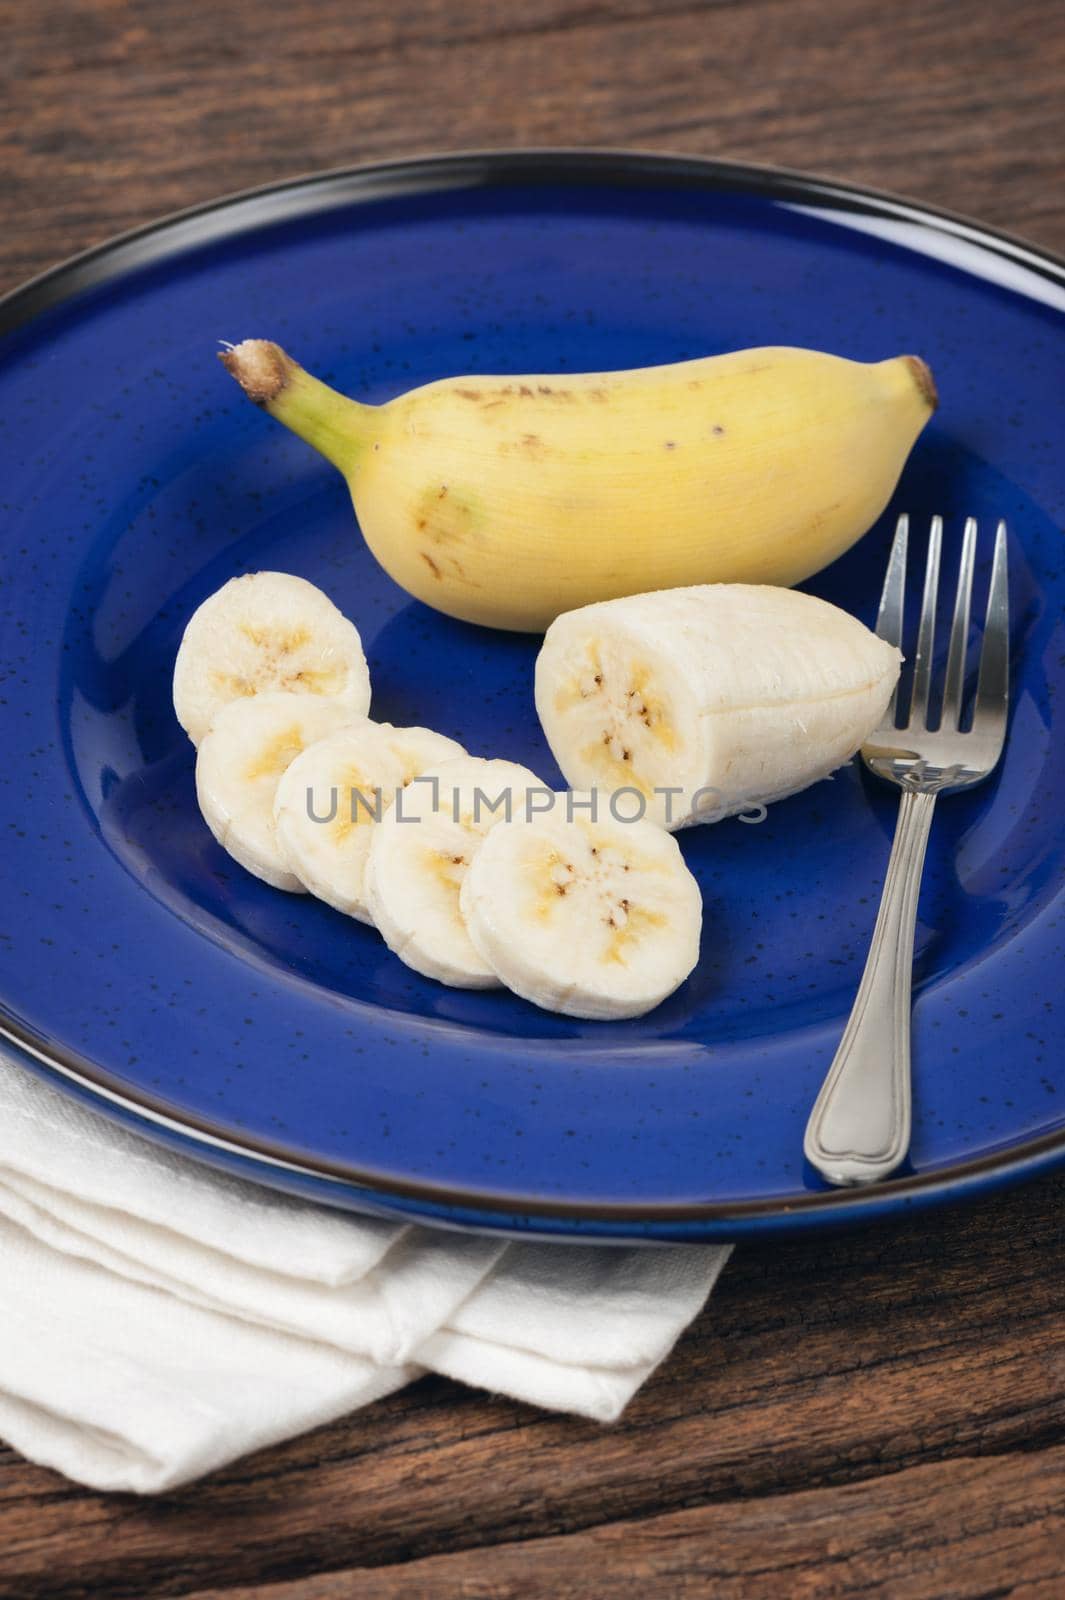 peeled and sliced cultivated banana on blue plate, healthy eating concept